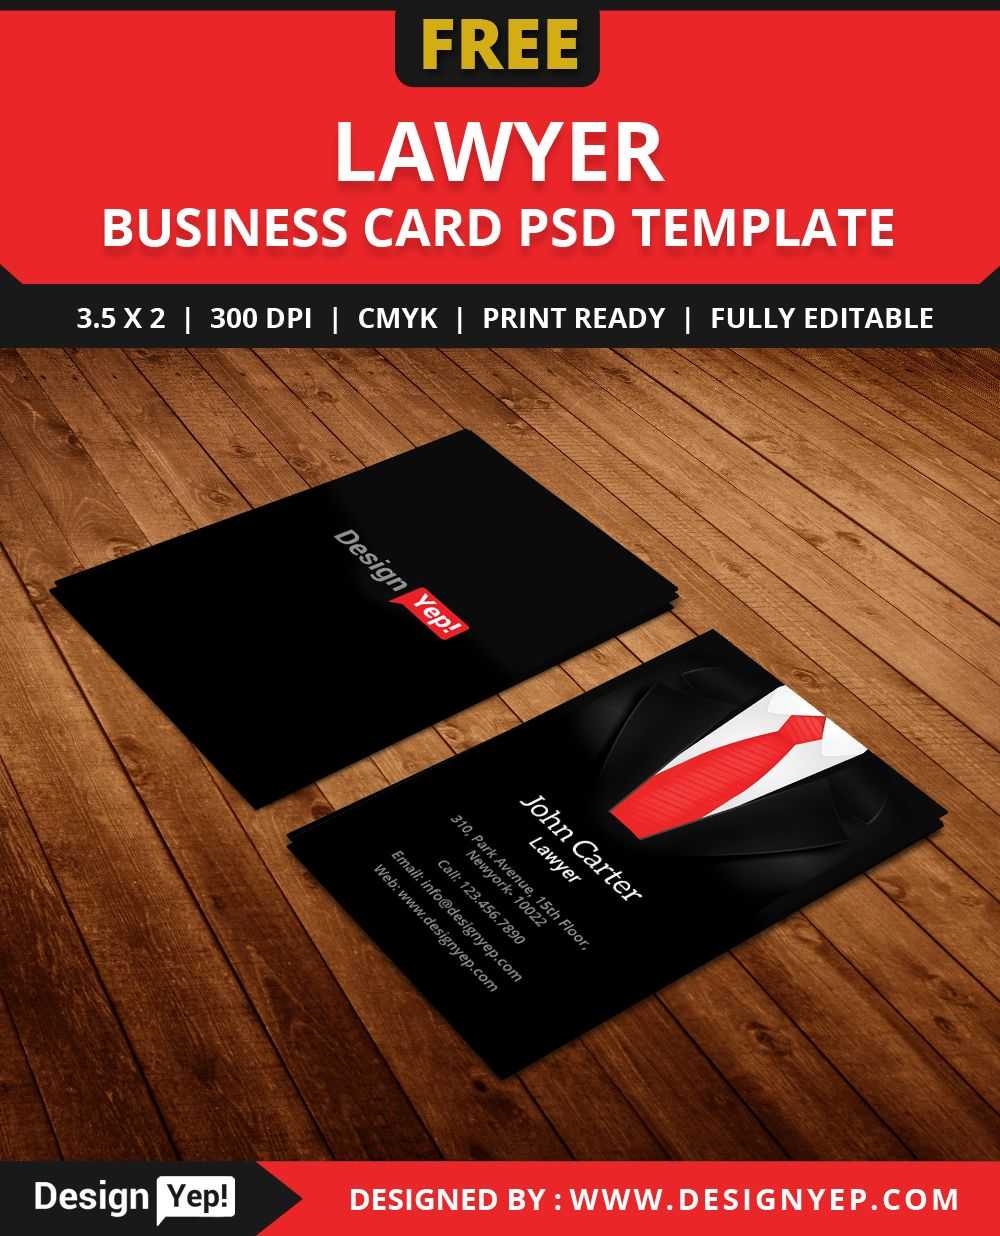 Free Lawyer Business Card Template Psd | Free Business Card With Regard To Calling Card Free Template